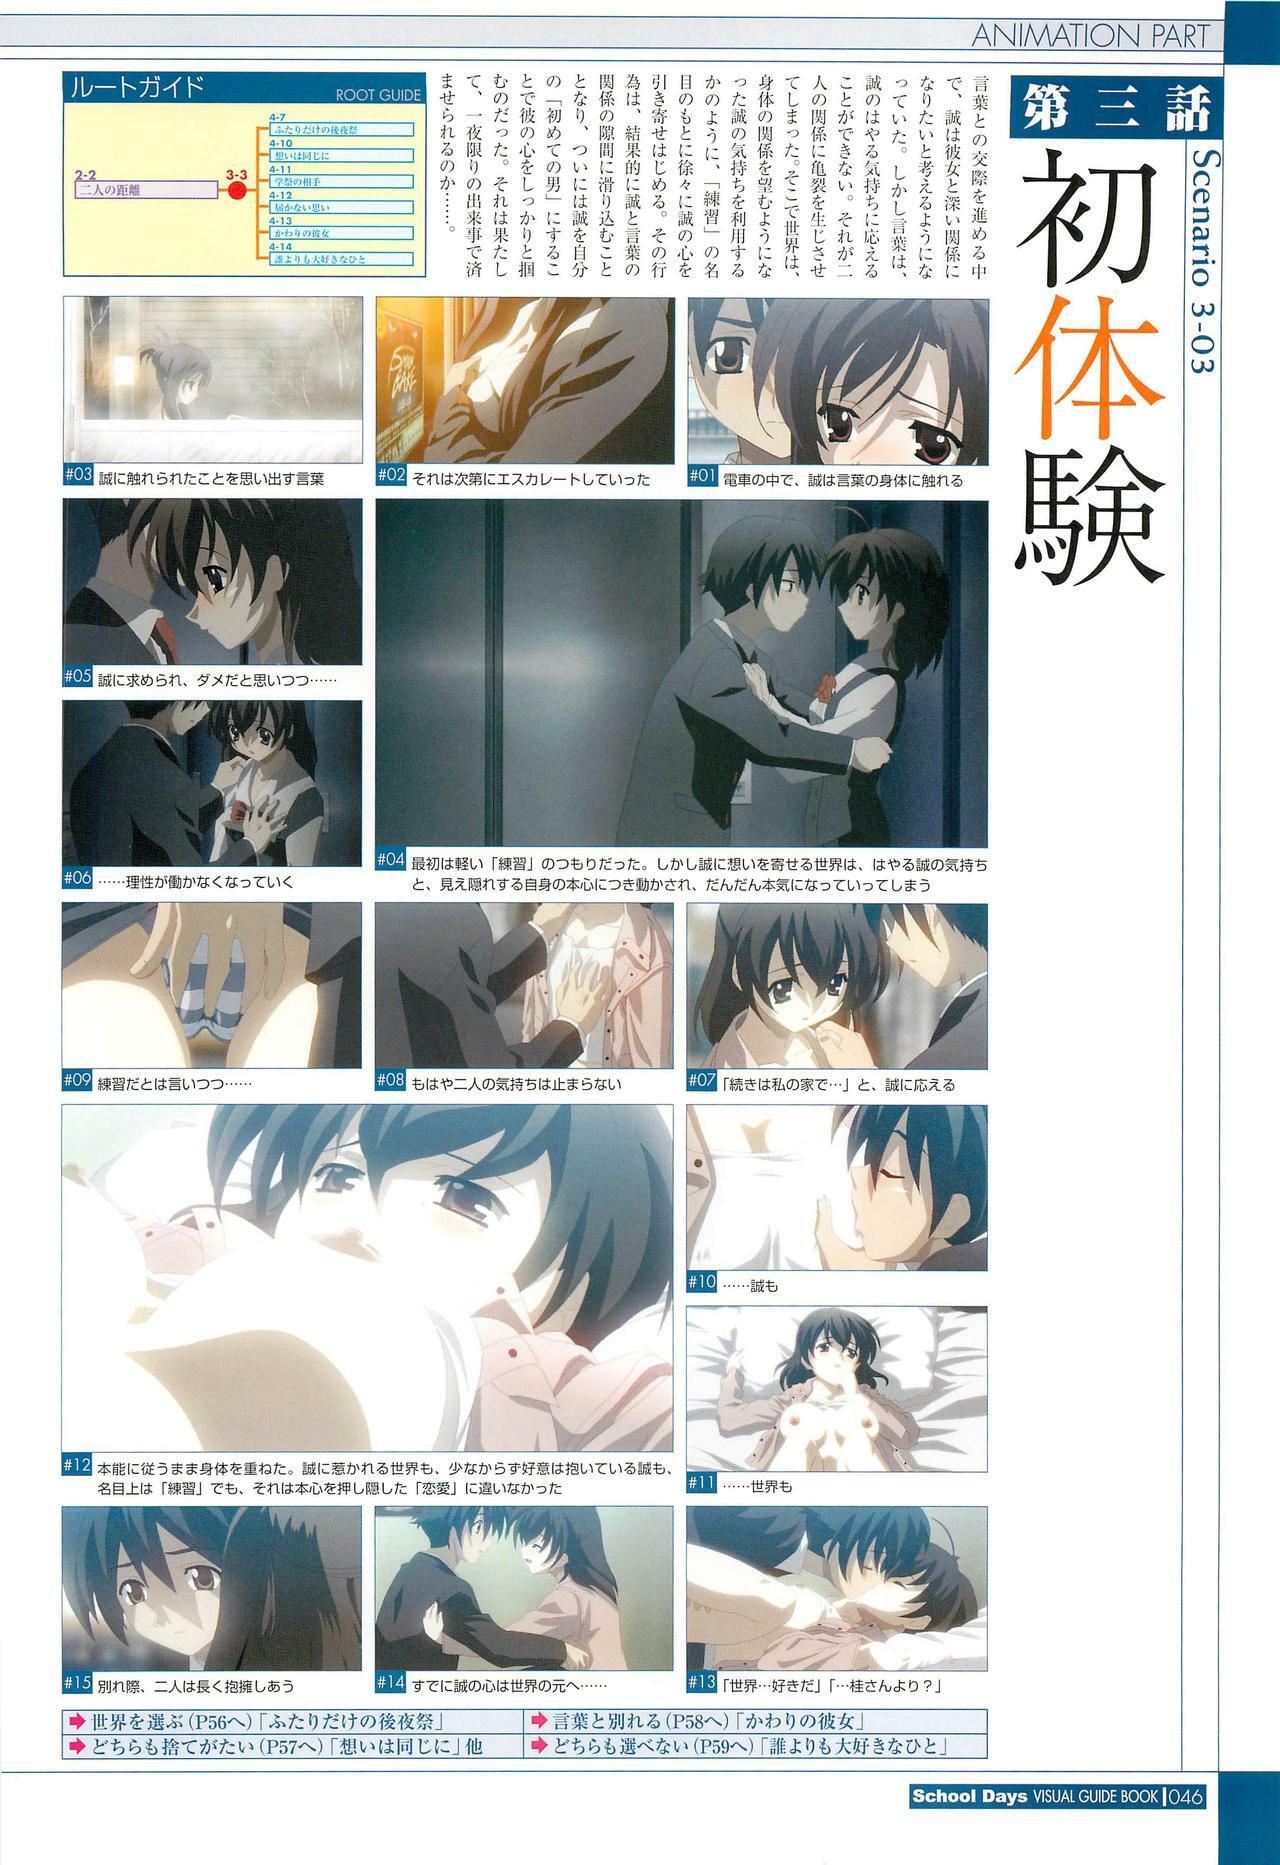 School Days Visual Guide Book page 48 full